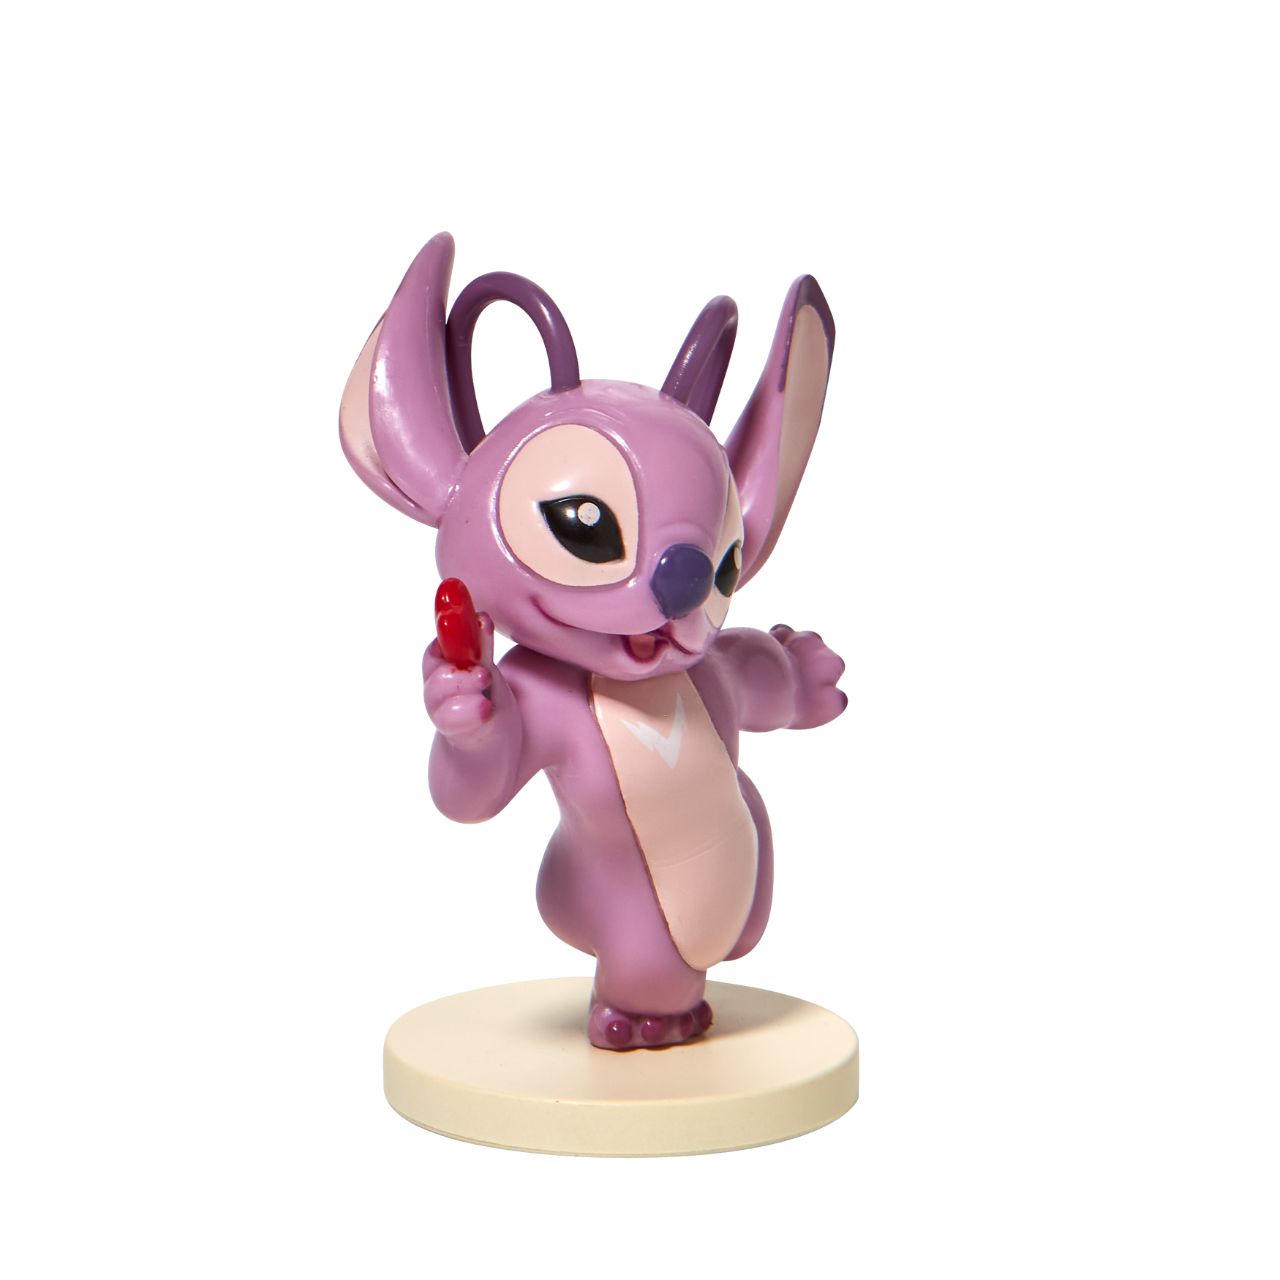 Stitch Angel with Heart Mini Figurine  This super cute Angel mini figurine is holding a little red heart just for you. Angel is the girlfriend of Stitch and is sweet and loving. This is the perfect addition to any Stitch or Disney collection. Made from high quality vinyl.